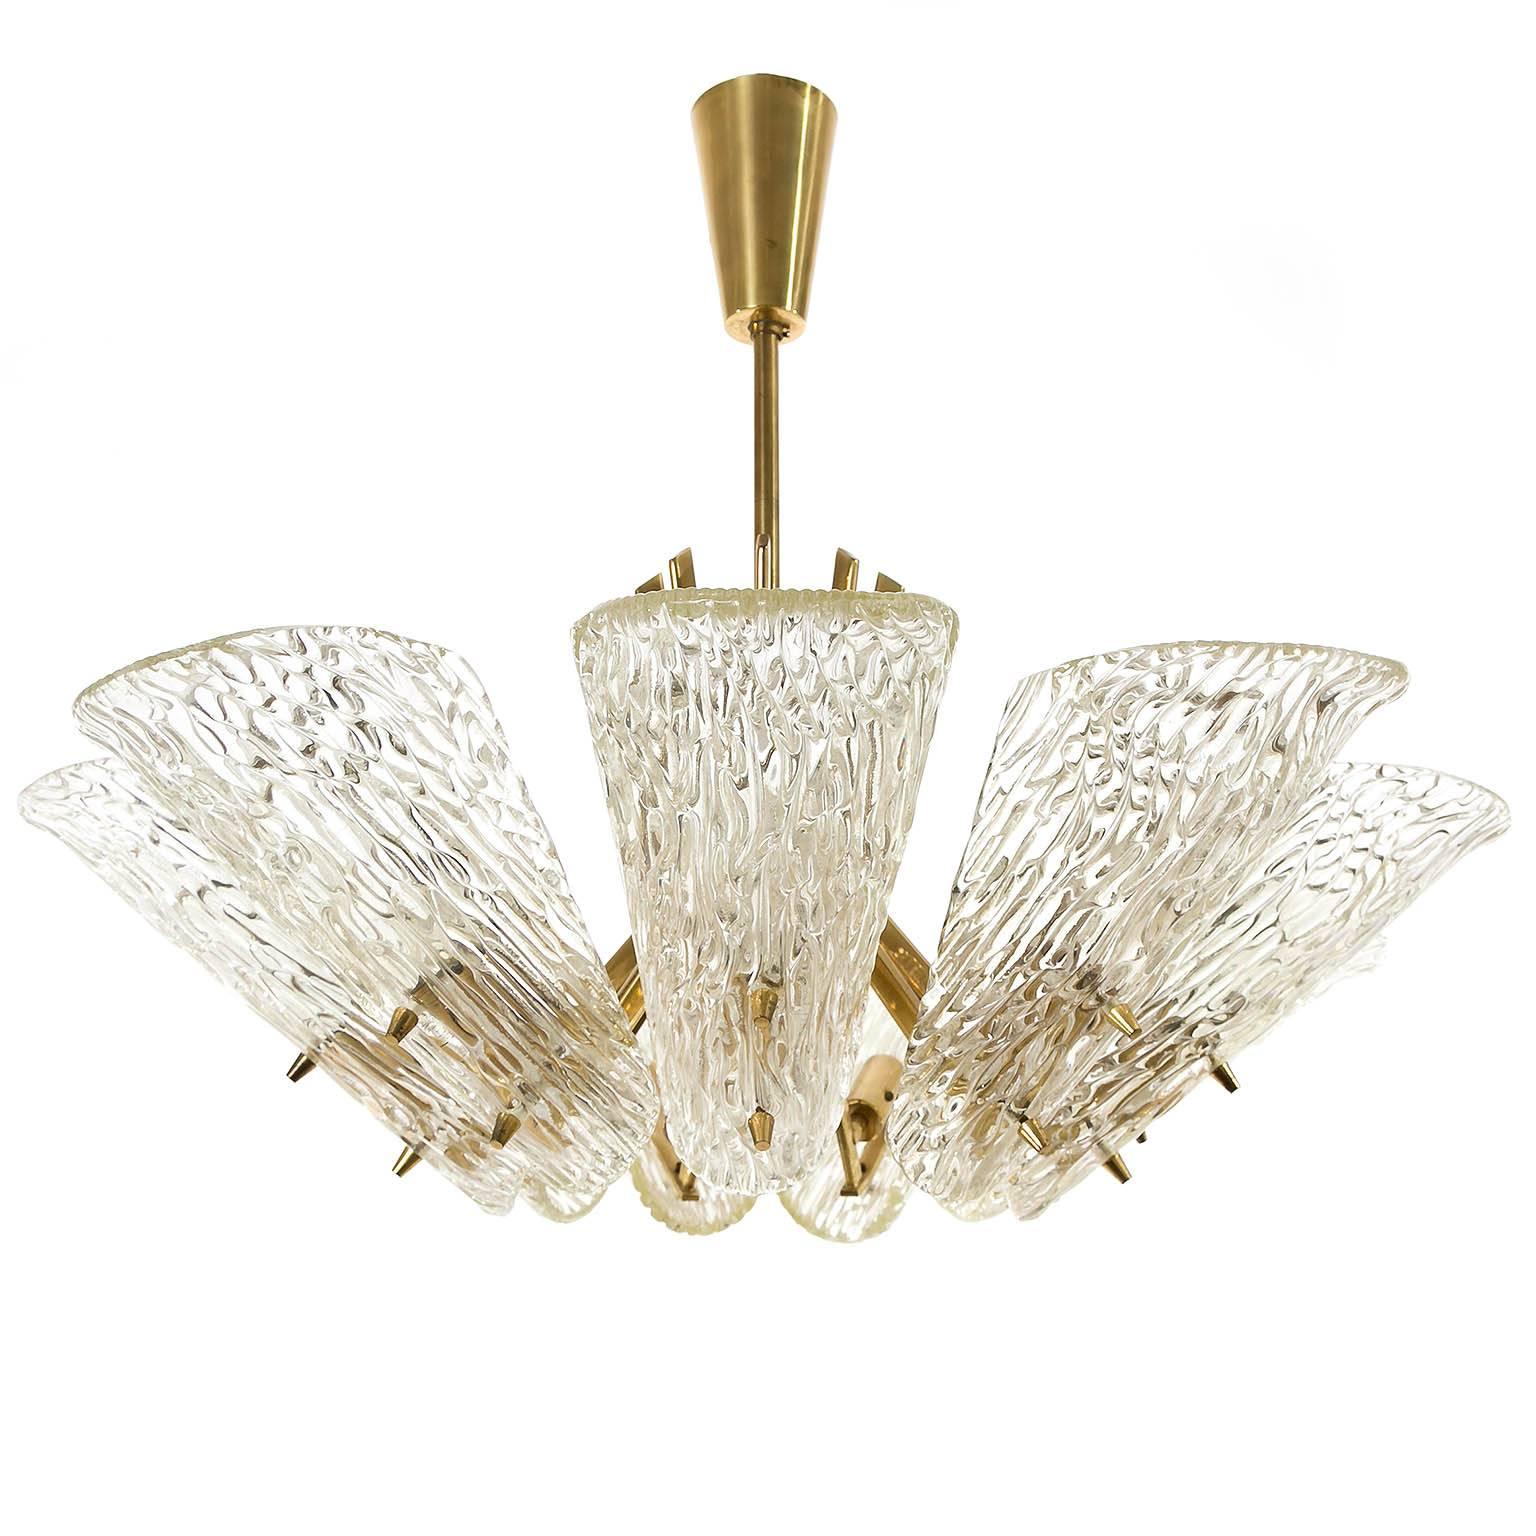 A Viennese glass and brass chandelier by J.T. Kalmar from the 1950s. 
The light features nine arms with sockets for small Edison base E14 bulbs (max. 40W per bulb) covered with pressed glass lamp shades.

Diameter: 26.8 in. (68 cm).
Height: body